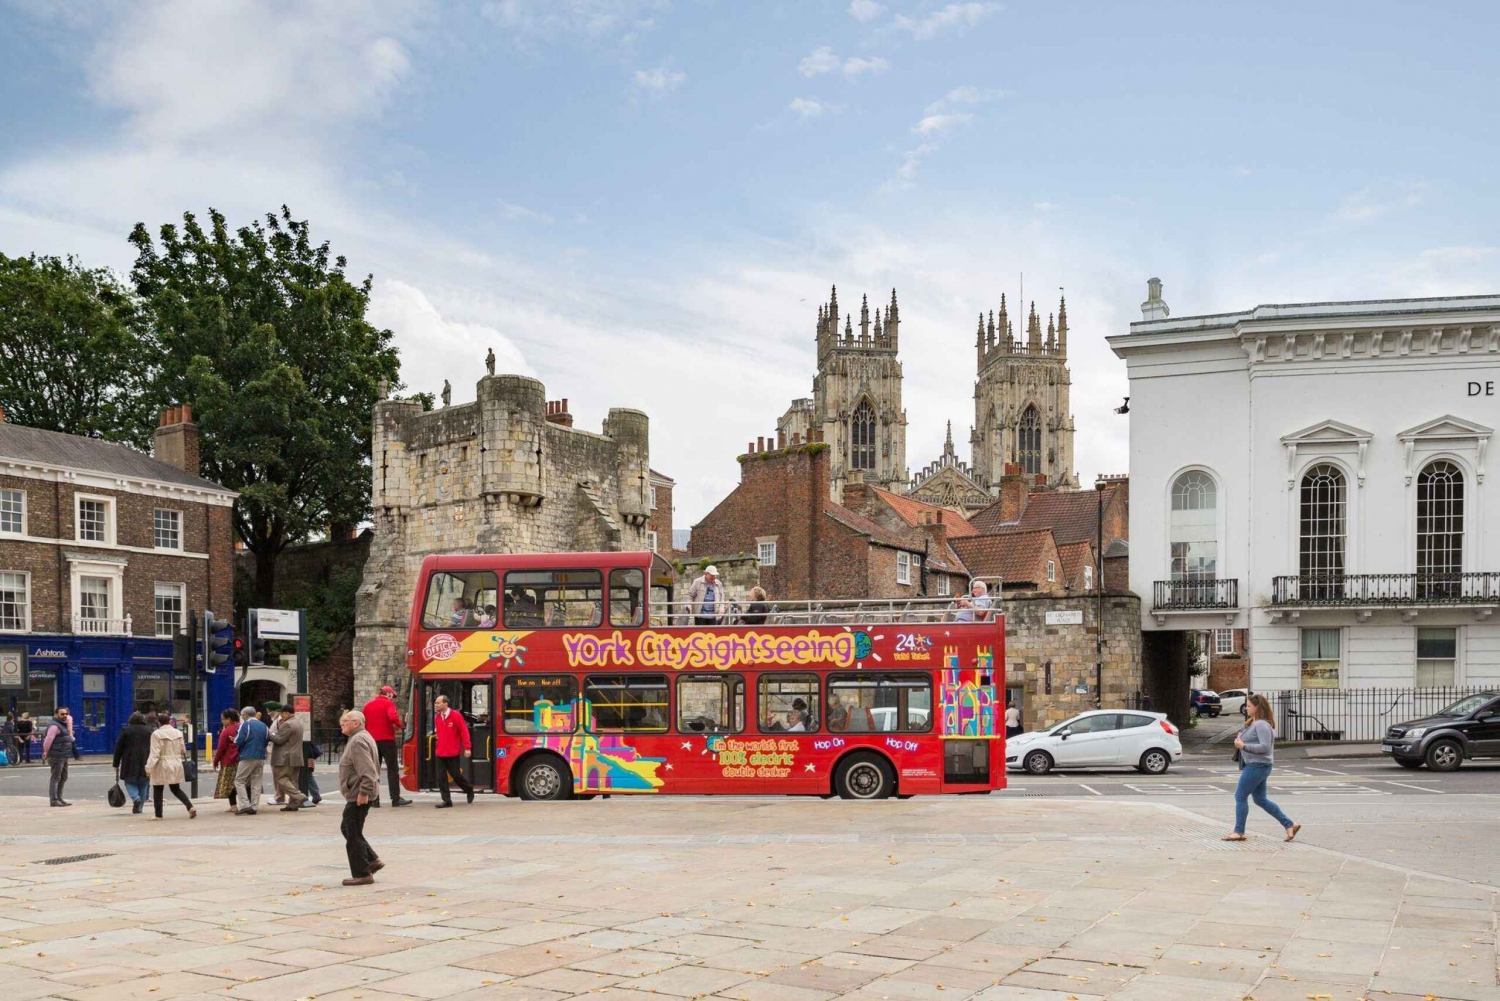 City Sightseeing York Hop-on Hop-off Bus Tour